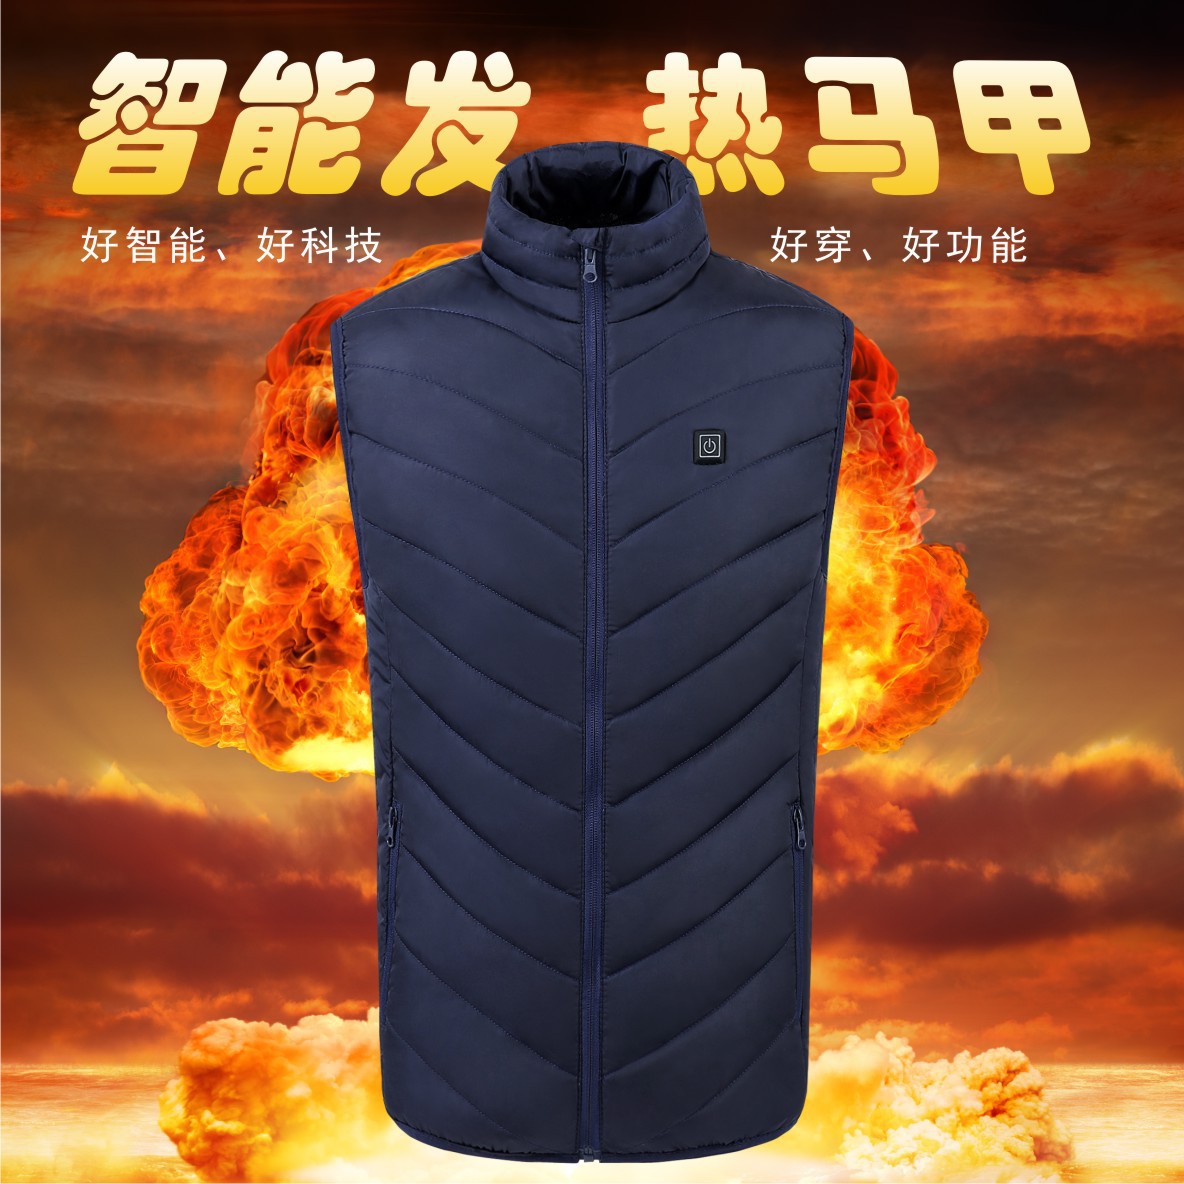 Autumn and winter new pattern Stand collar heating vest Graphene electrothermal Vest USB security intelligence constant temperature Fever clothes